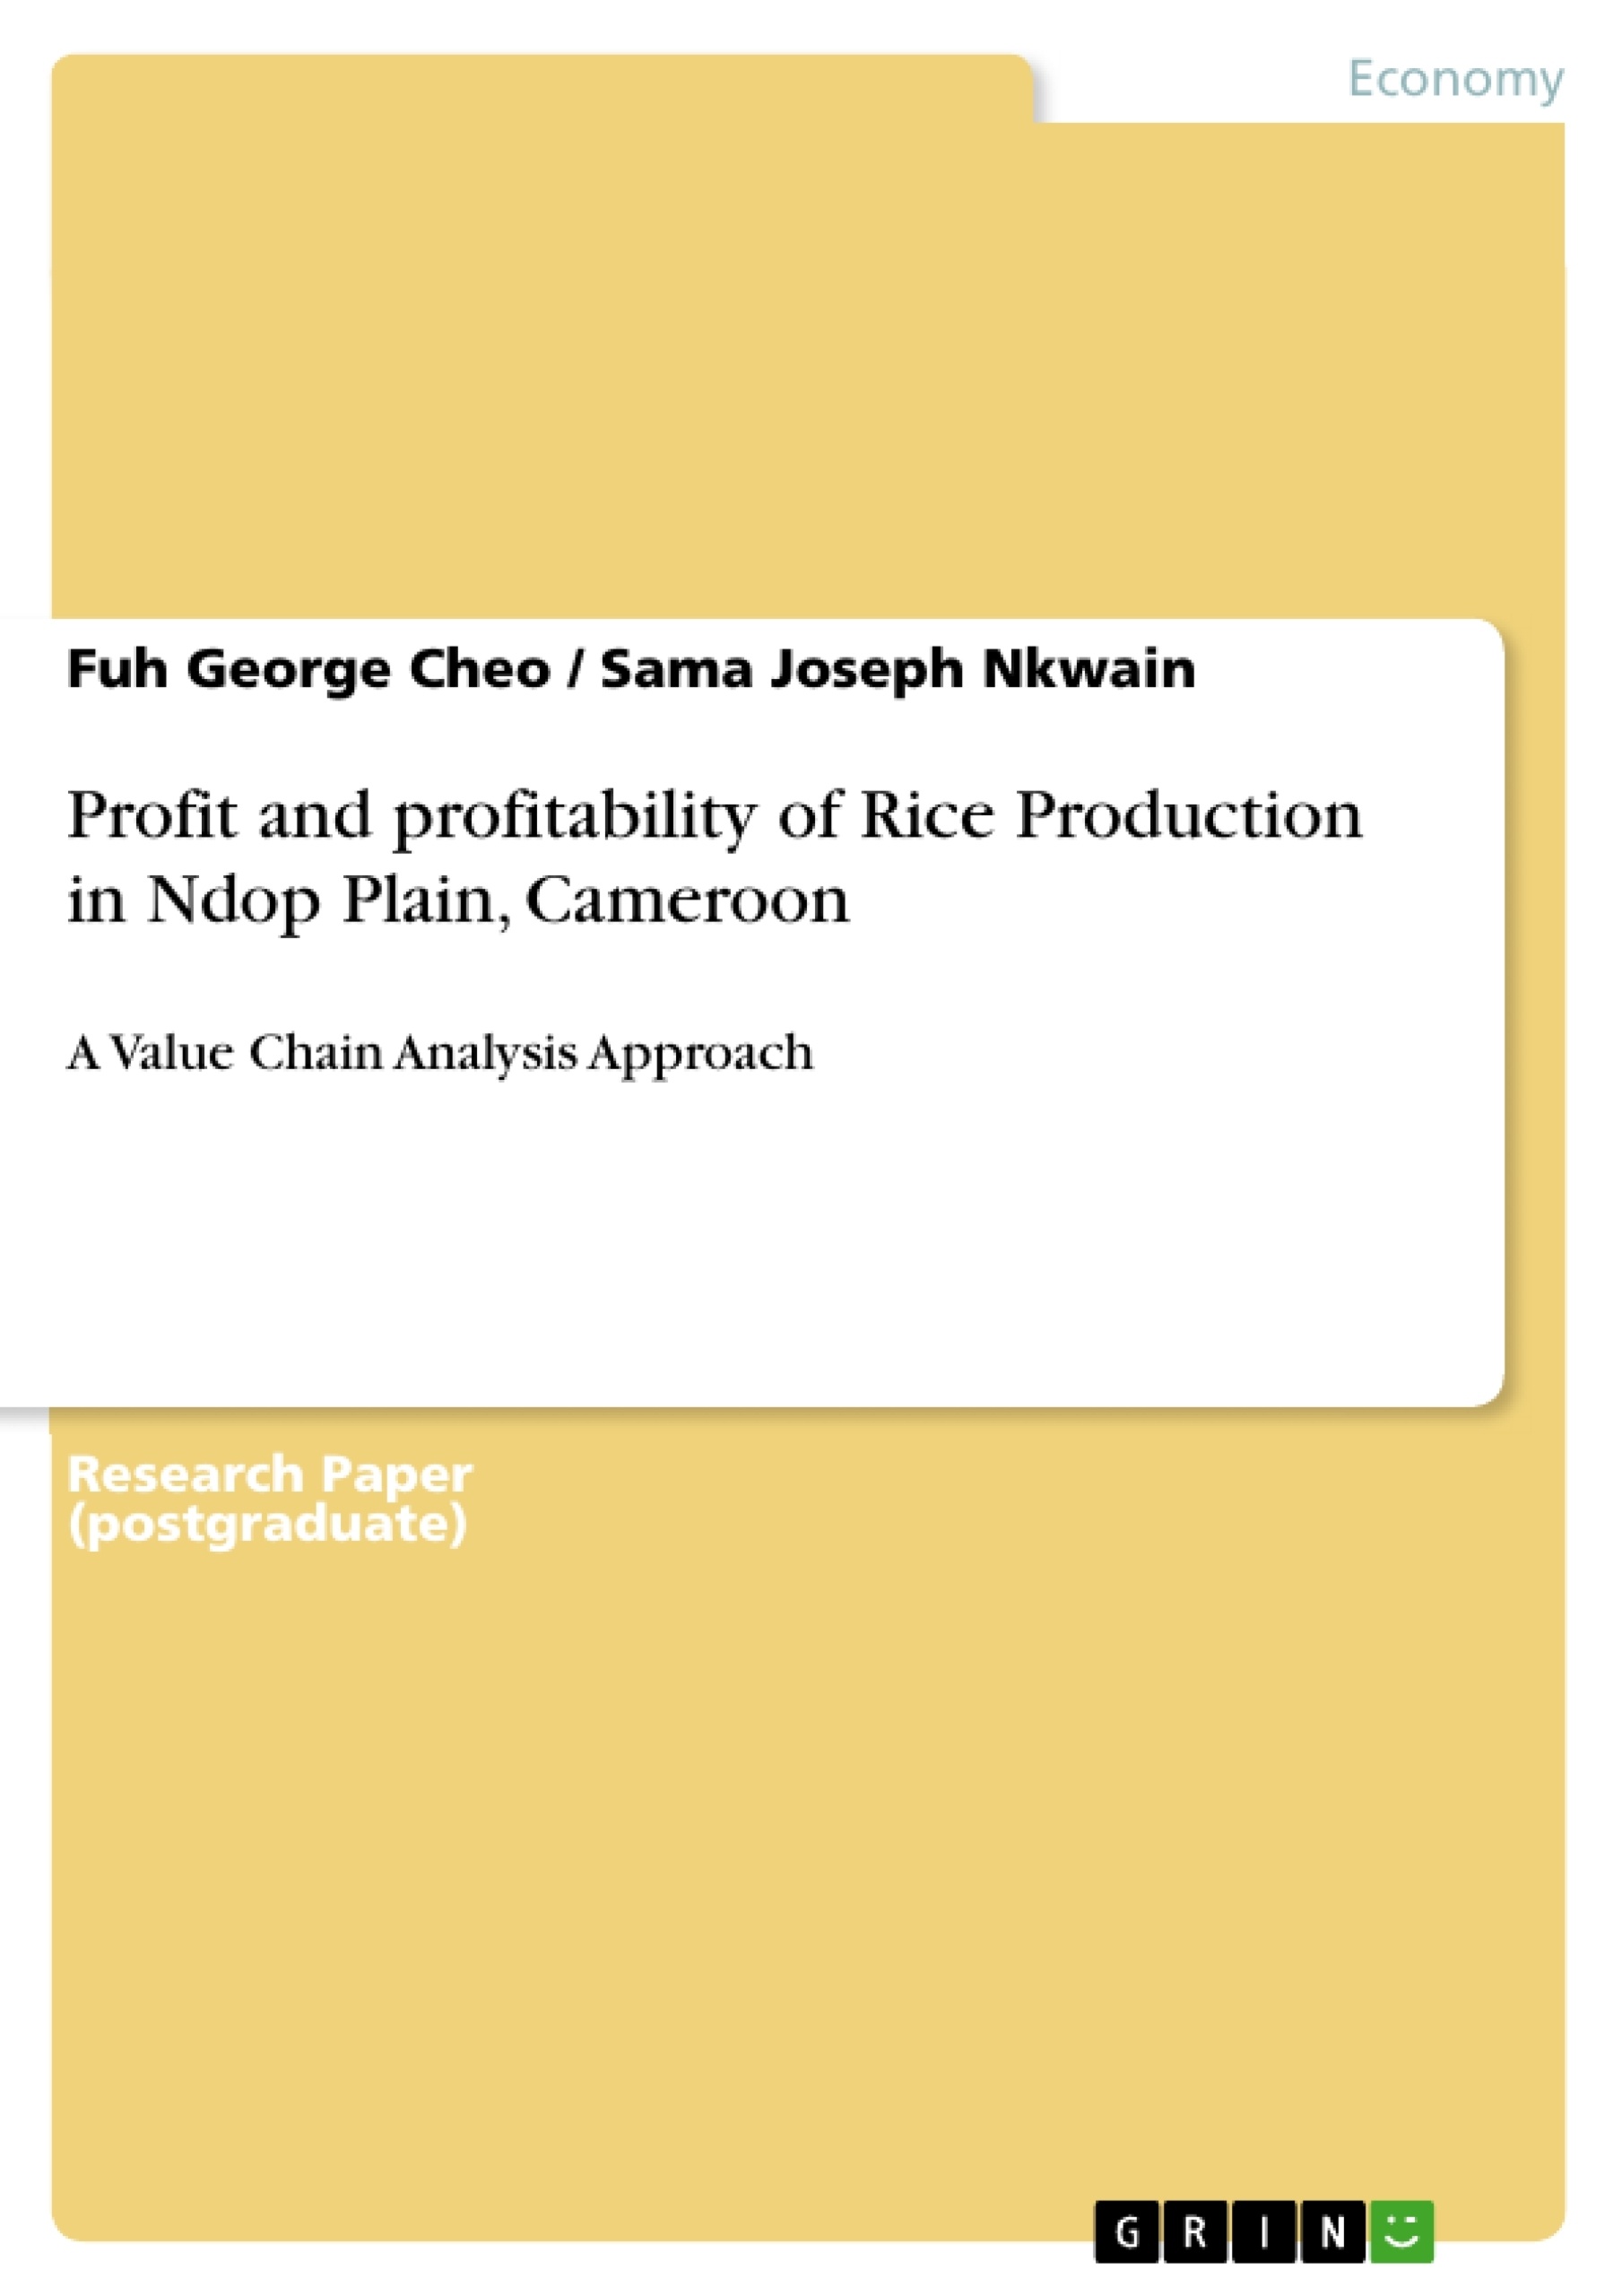 Title: Profit and profitability of Rice Production in Ndop Plain, Cameroon